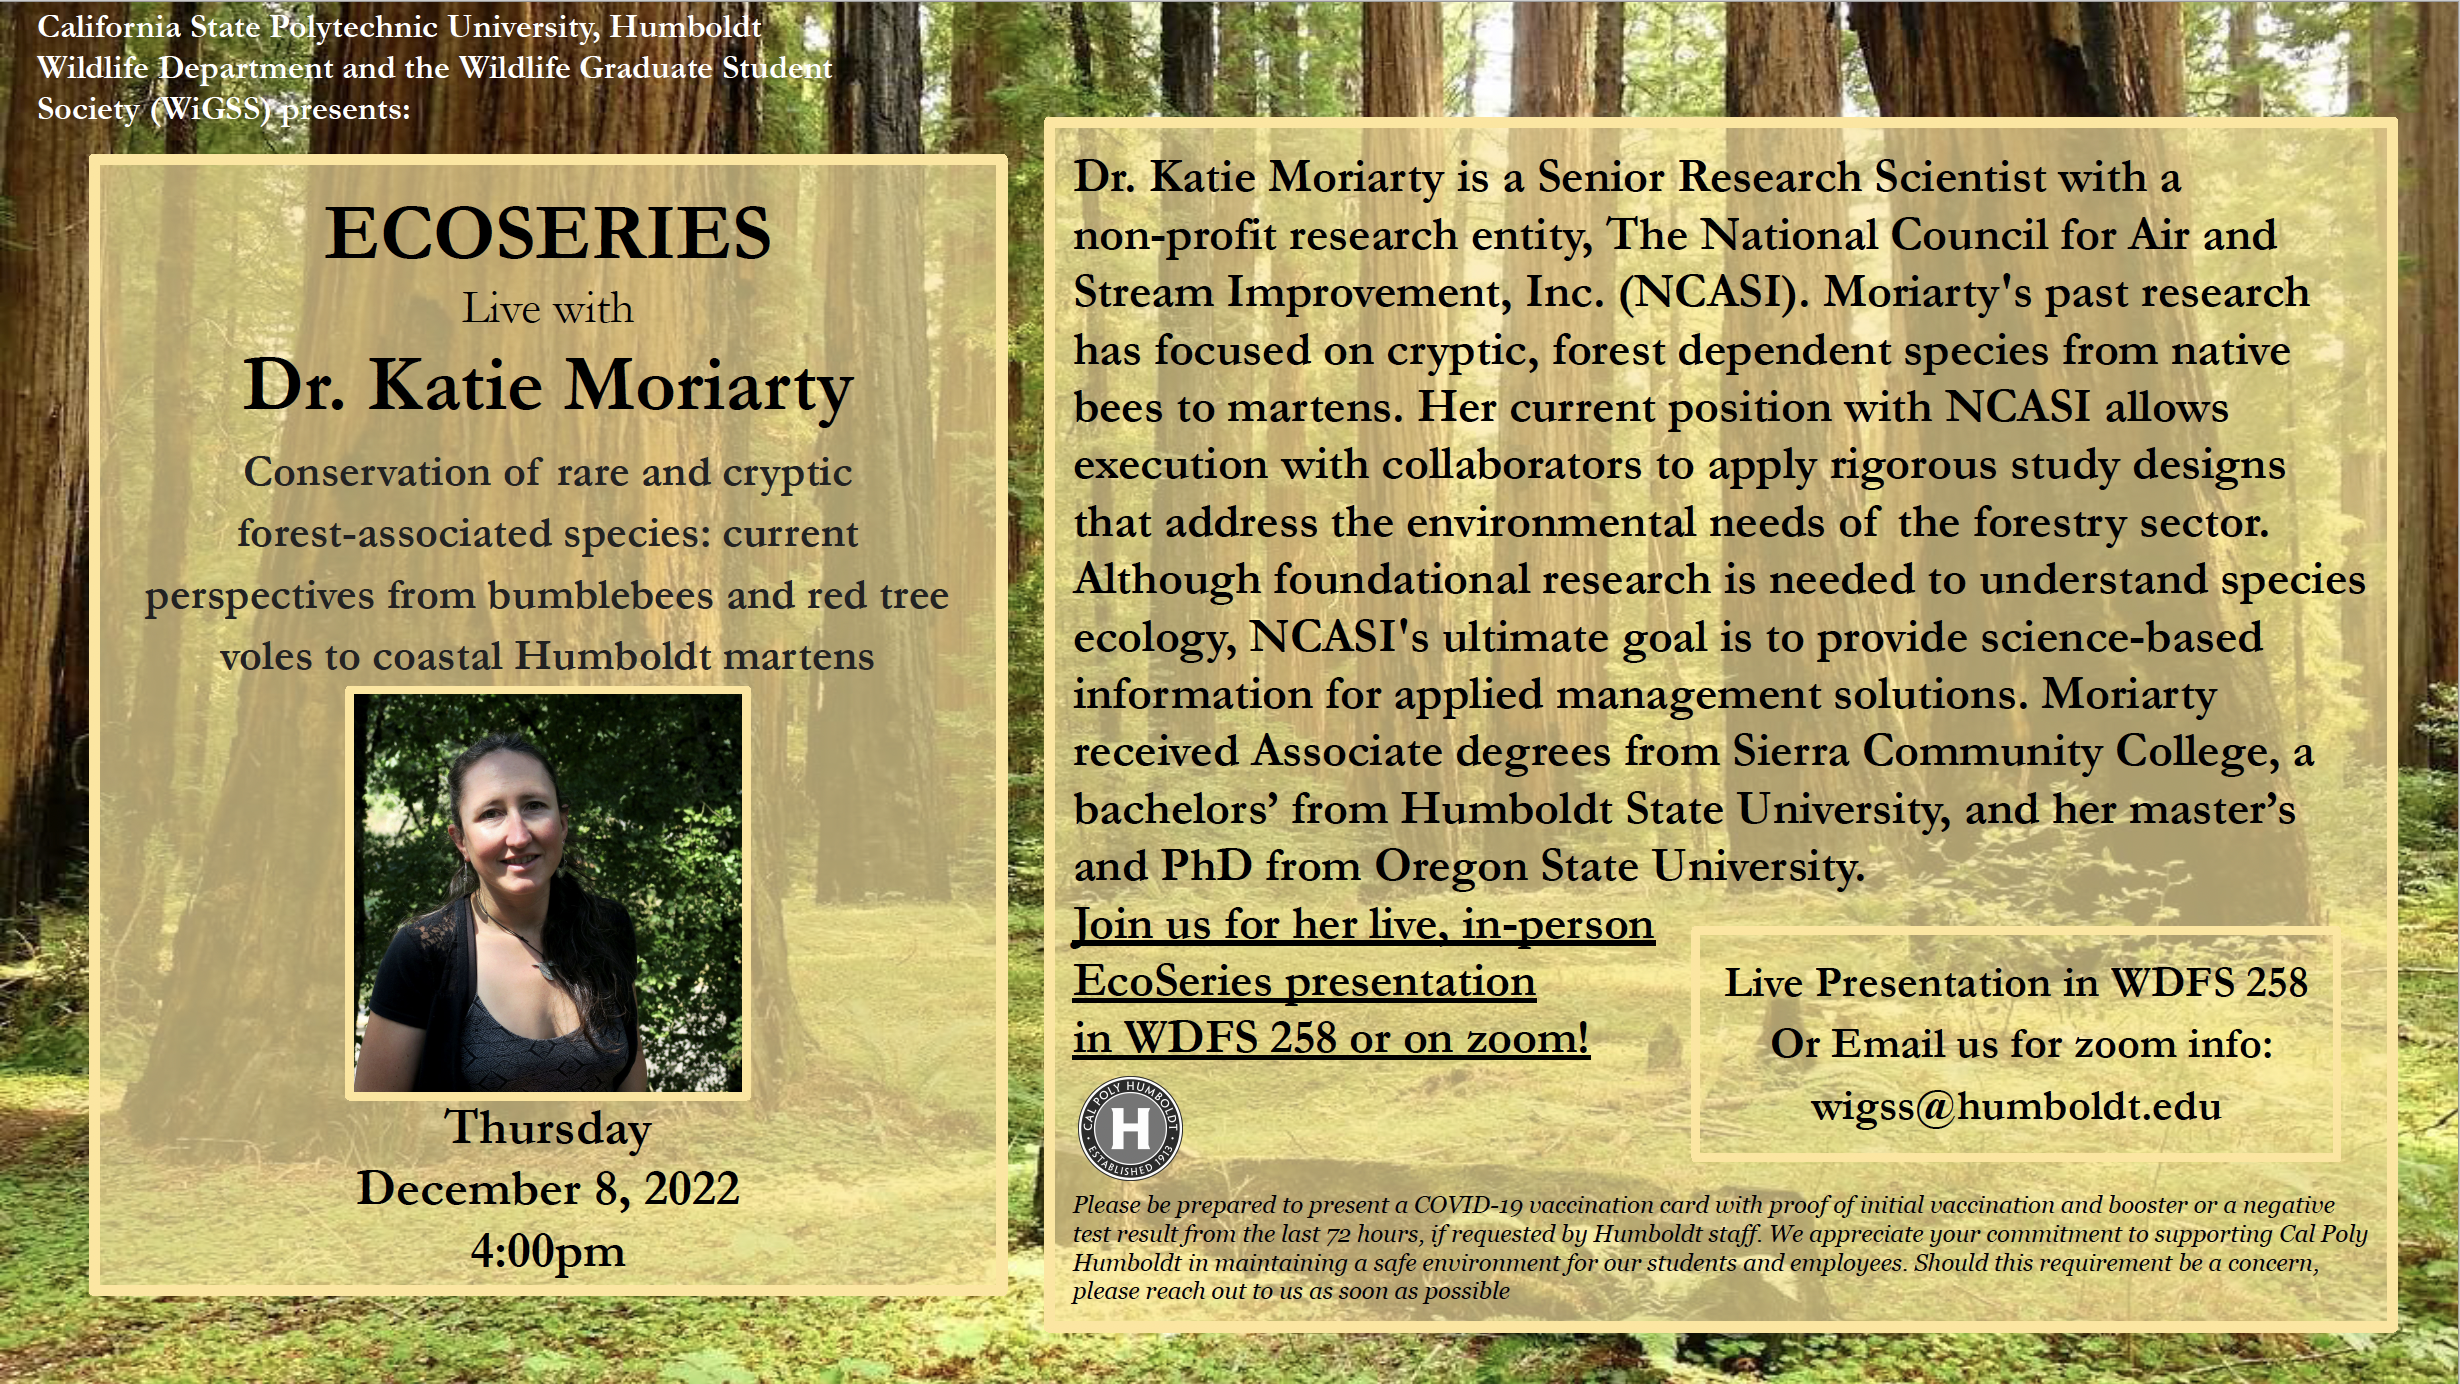 EcoSeries with Dr. Katie Moriarty 4pm in WDFS 258 